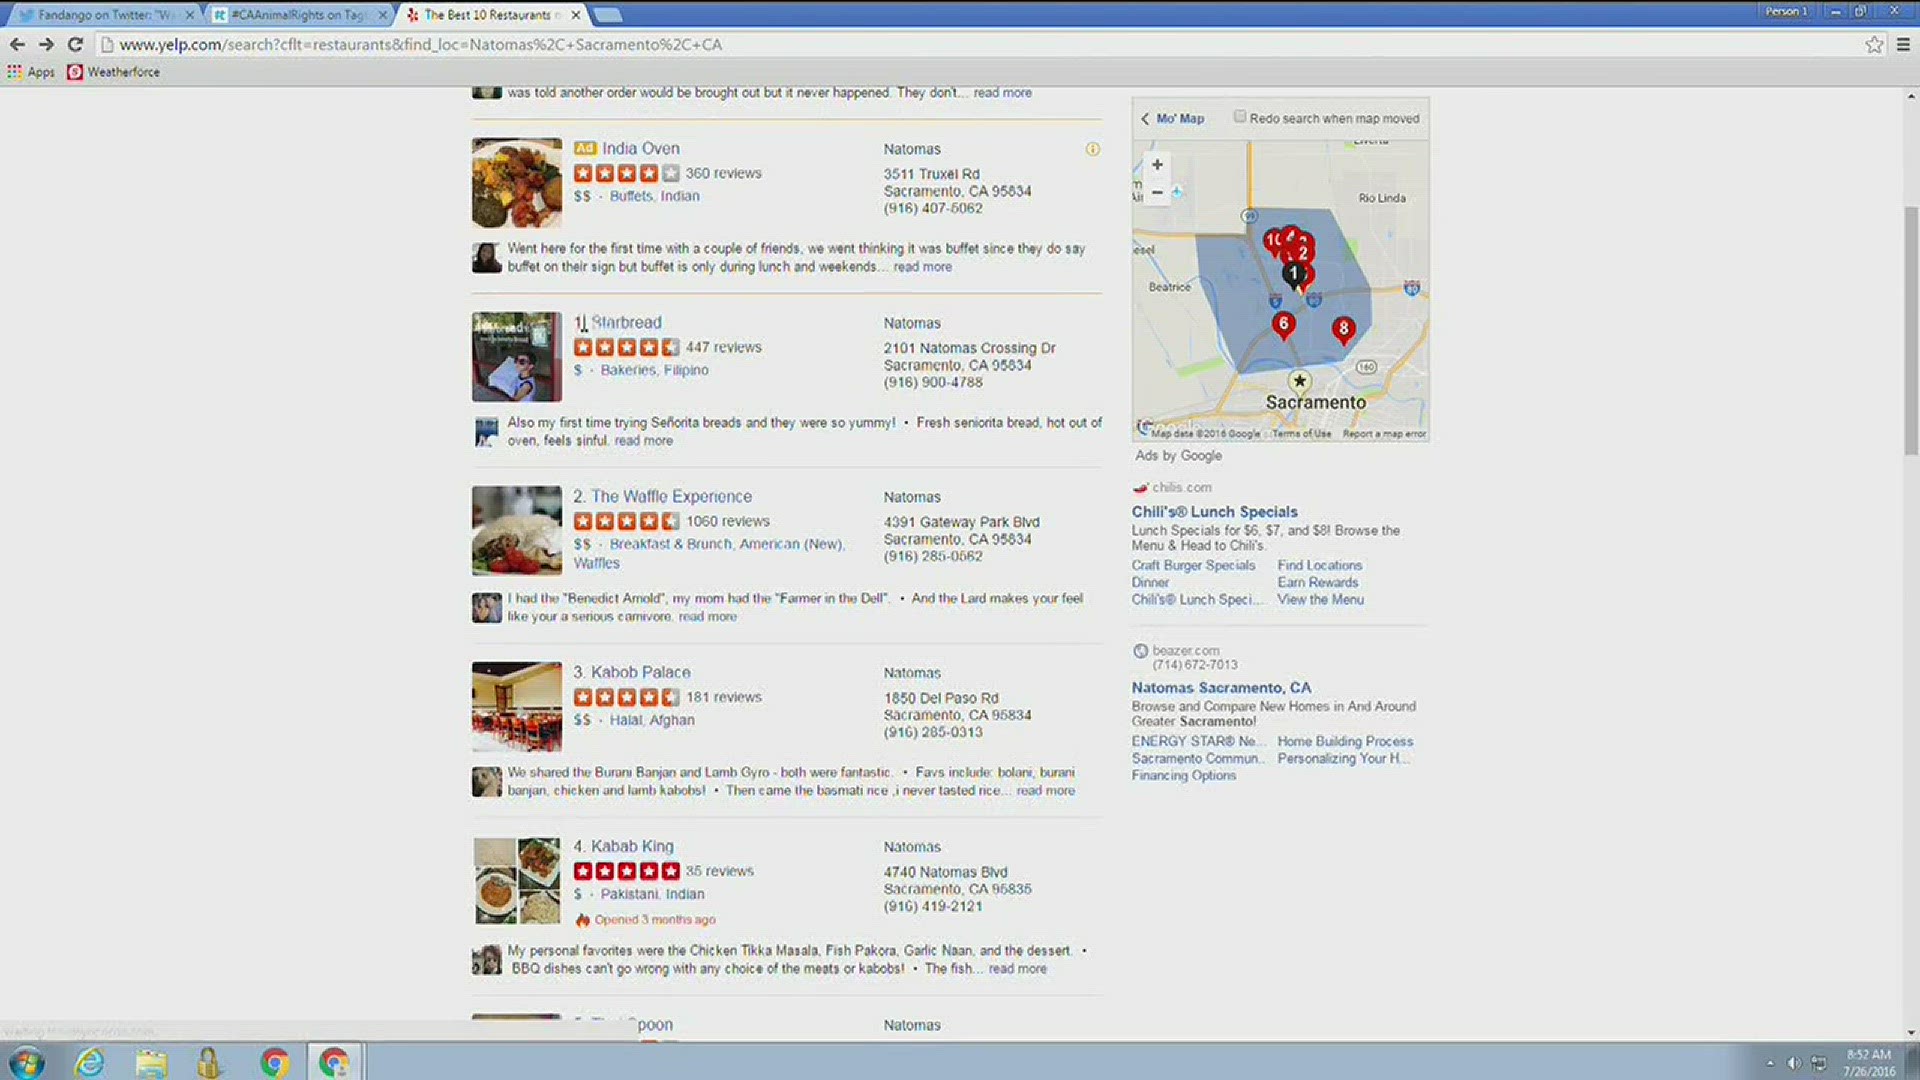 The website Yelp has now included health inspections for restaurants in Sacramento.